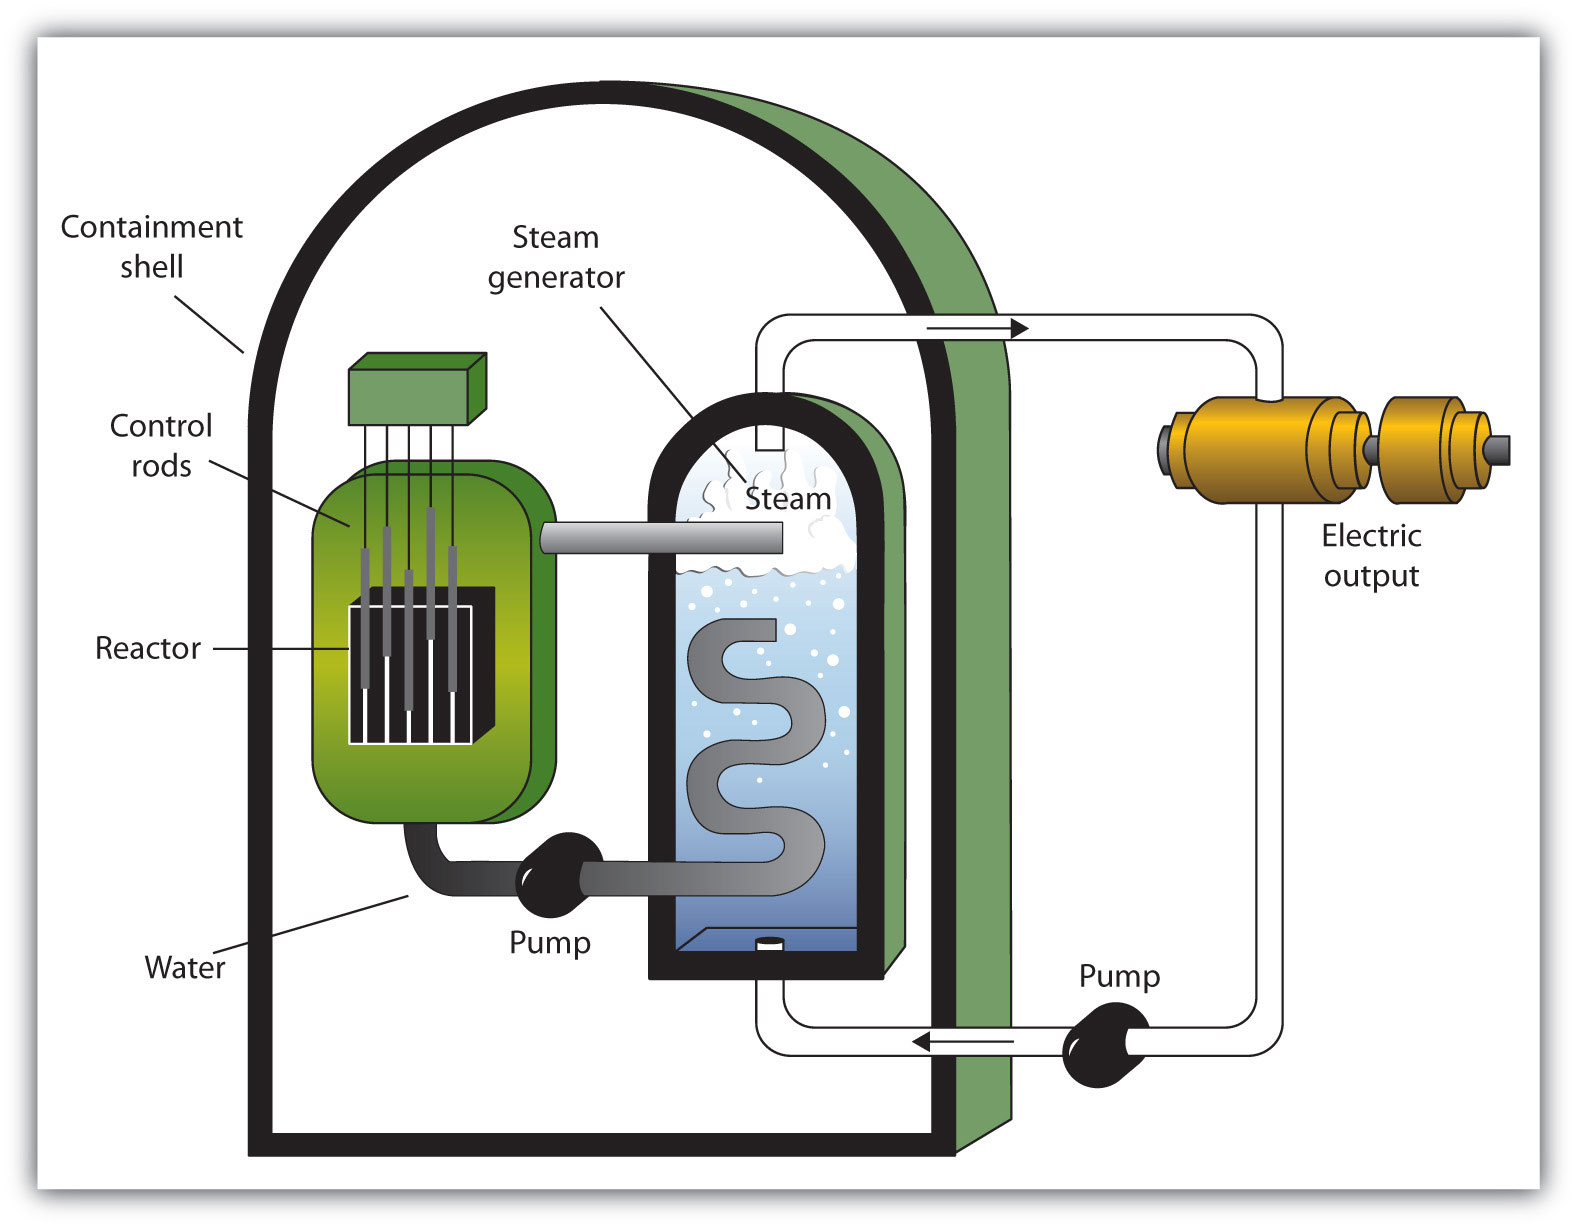 The diagram of the nuclear power point includes the containment shell, control rods, reactor, water, pump, steam generator, and electric output.